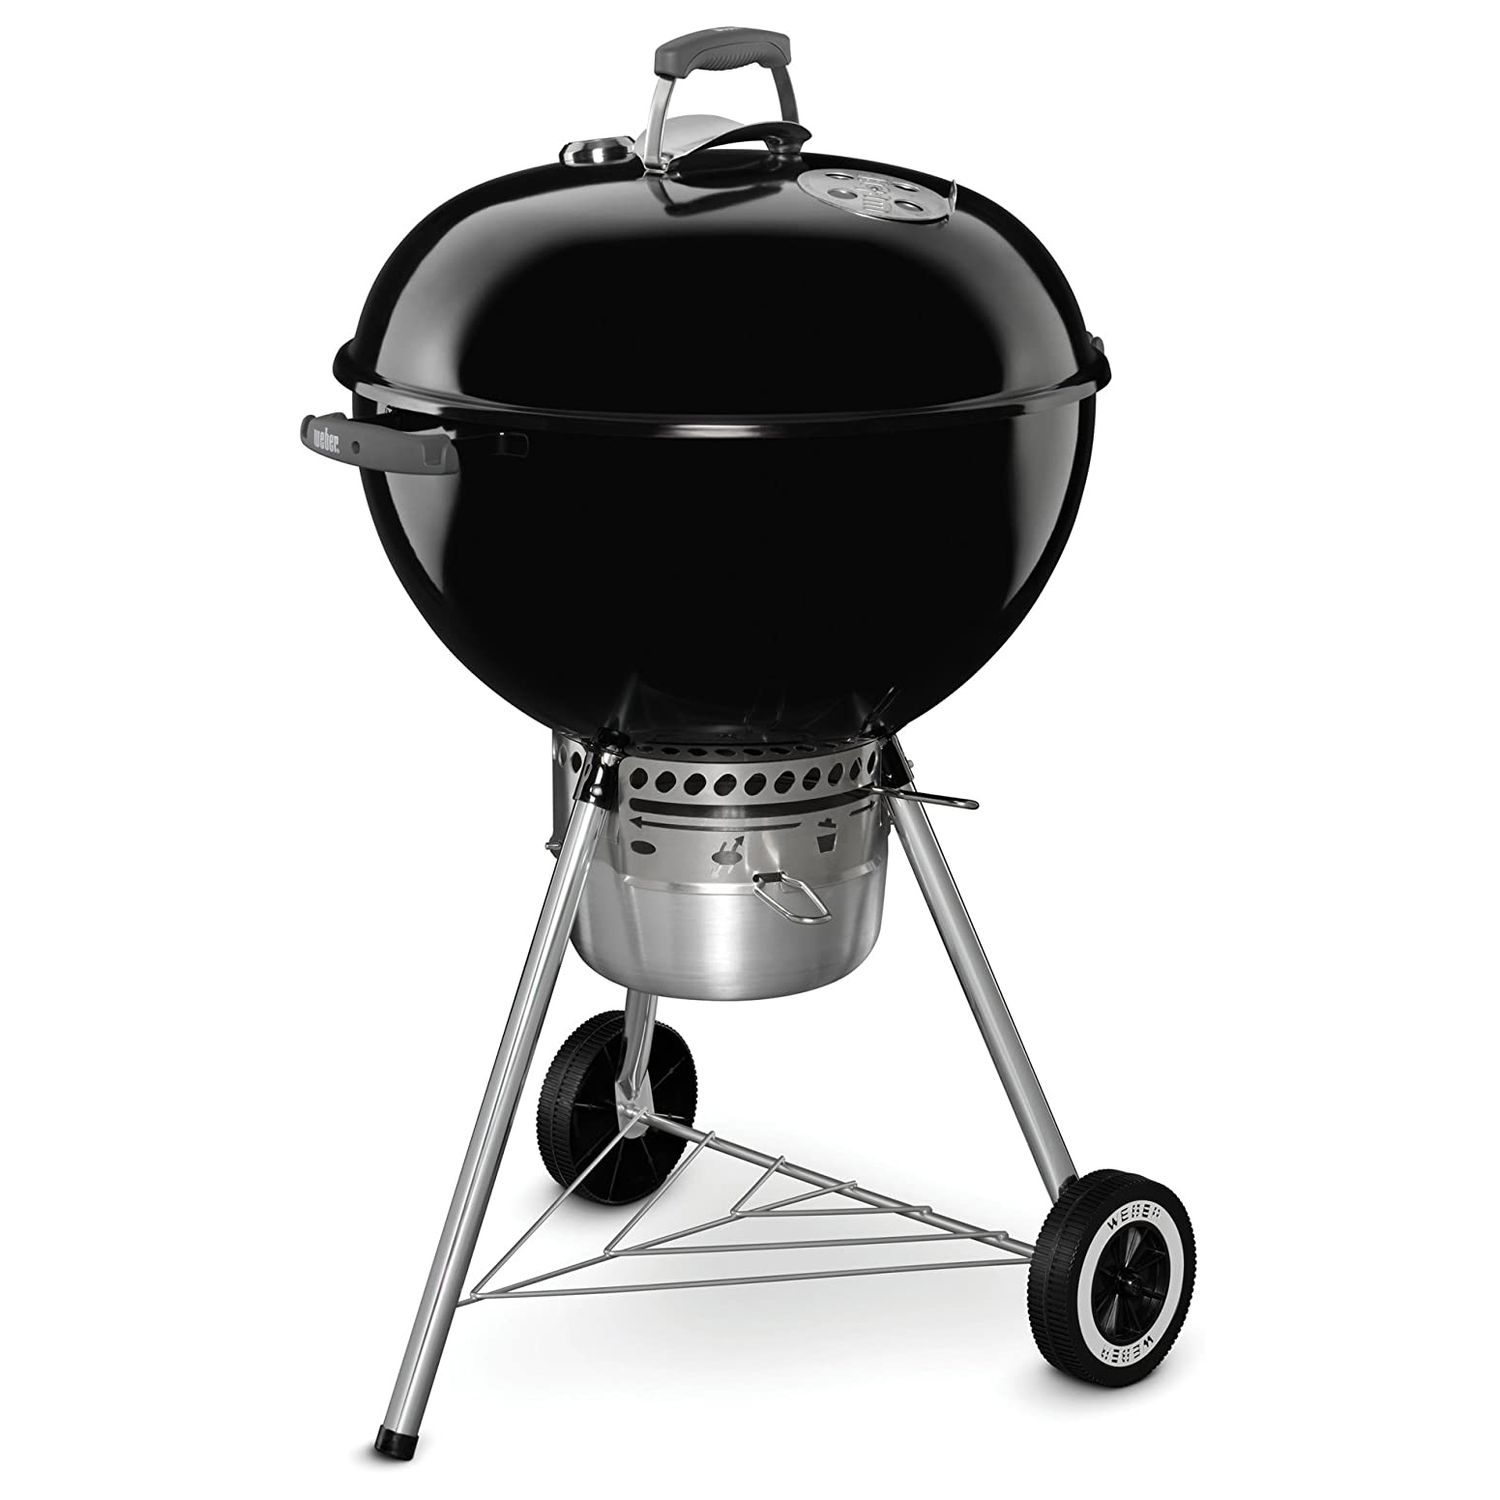 Weber Original Kettle Premium Charcoal Grill, 22-Inch, Black on white background